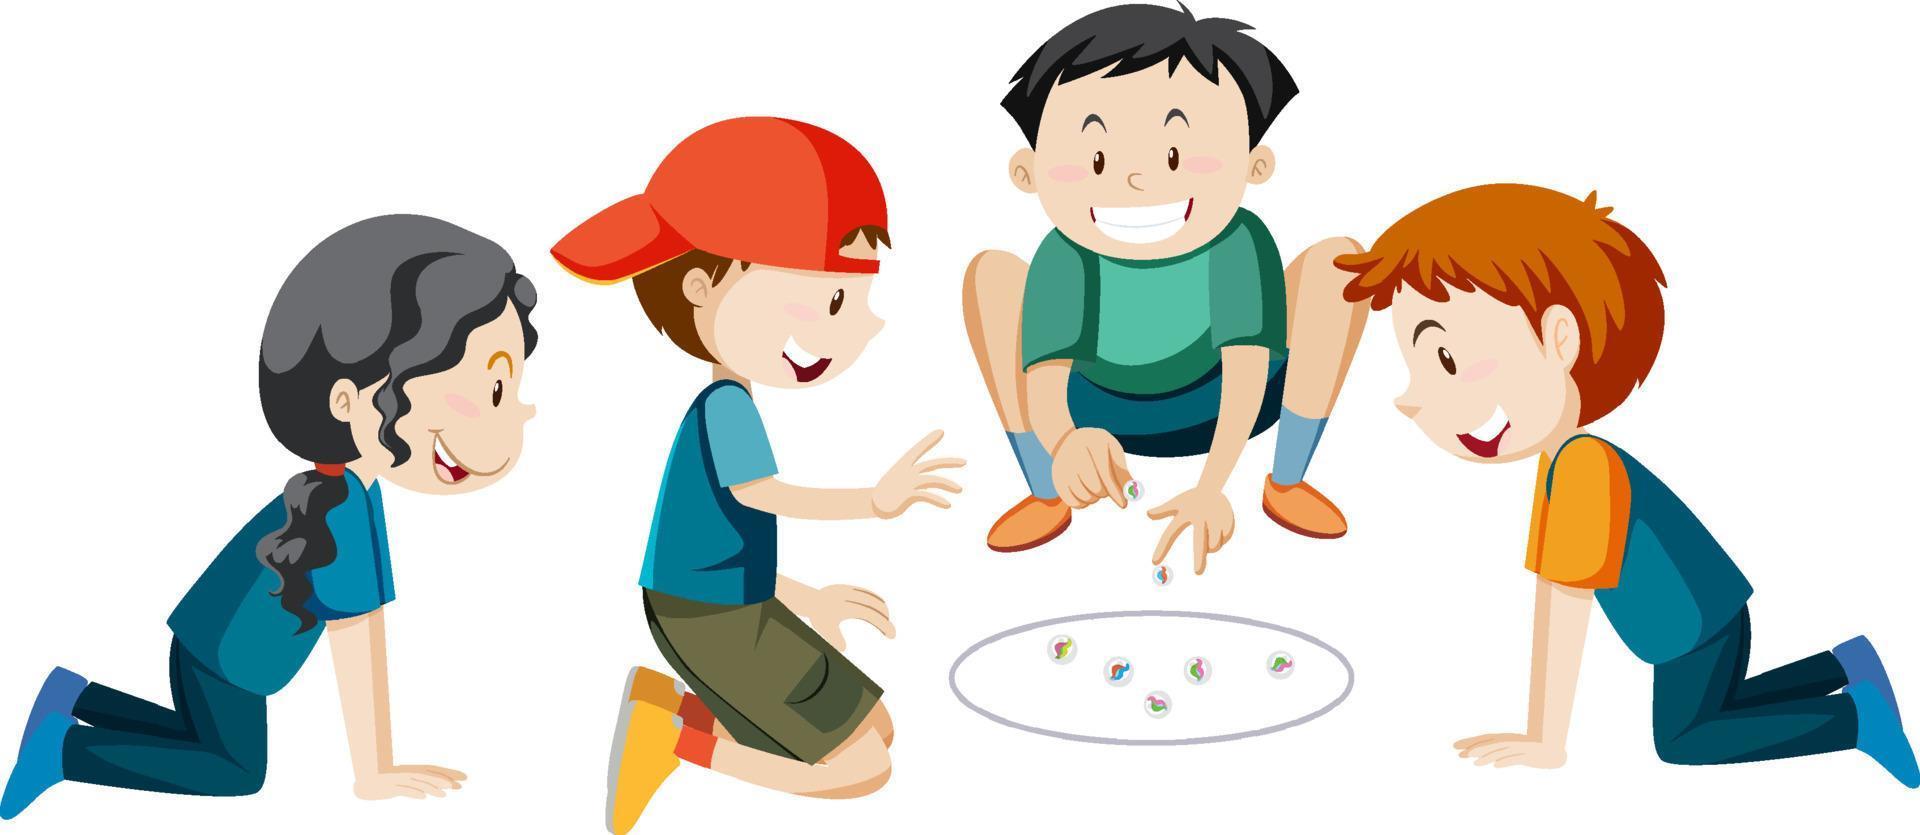 Children playing marbles on white background vector